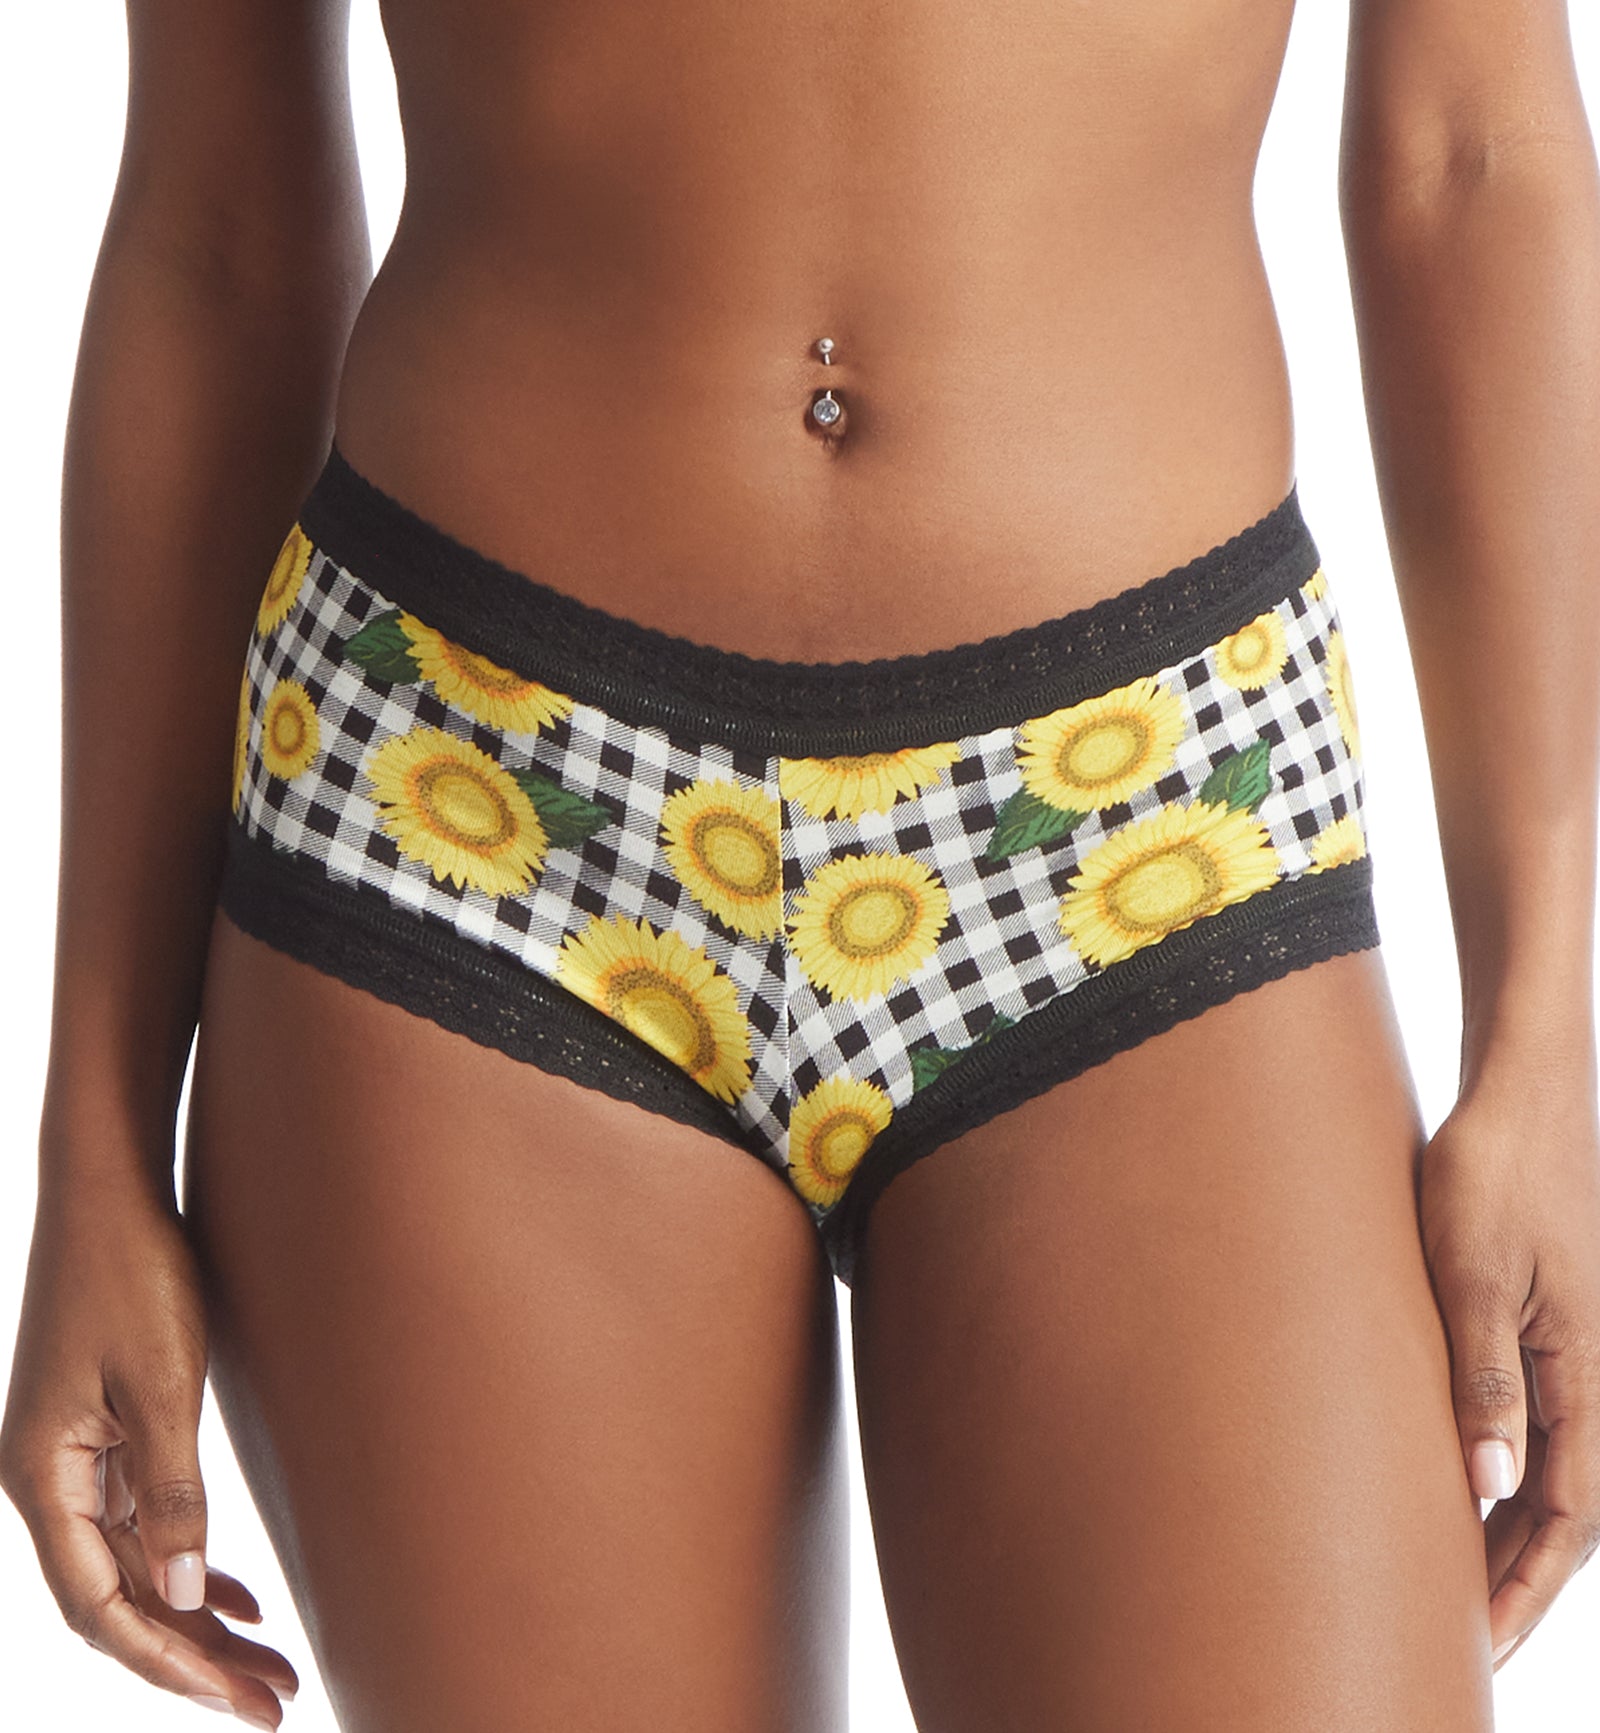 Hanky Panky DreamEase Printed Boyshort (PR681274),Small,Fields of Gold - Fields of Gold,Small